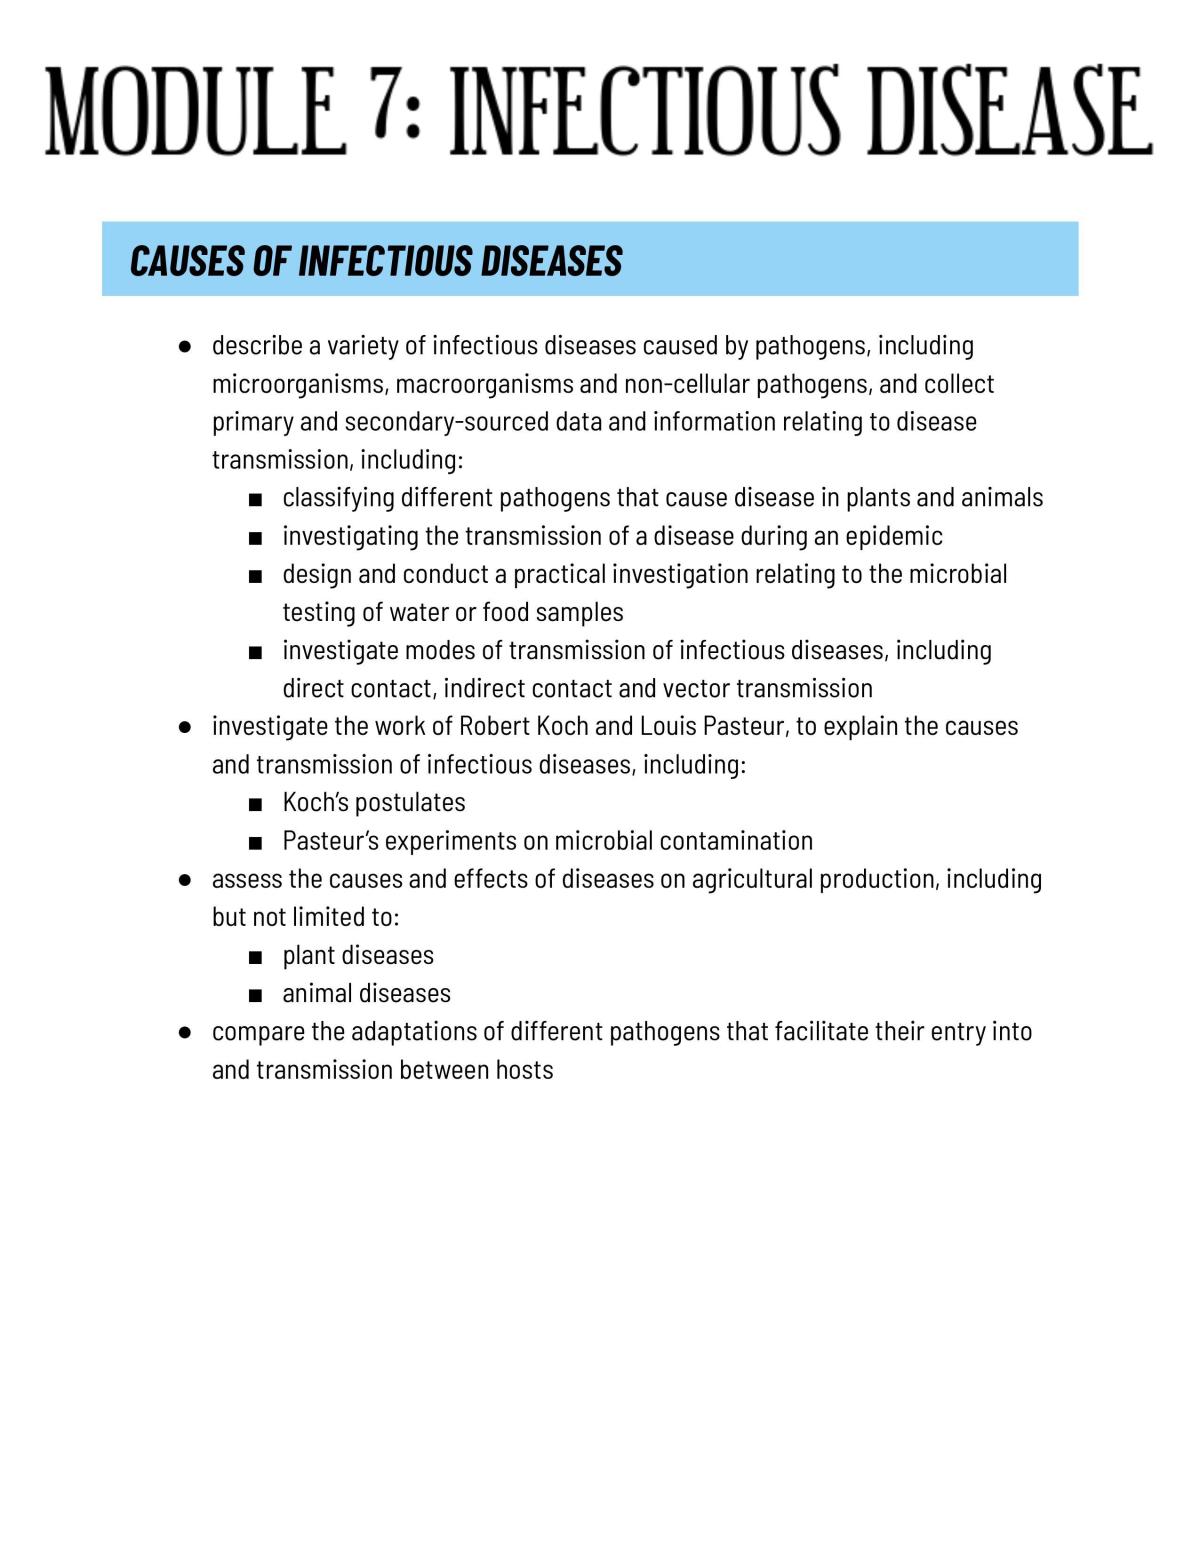 Module 7: Infectious Disease Full Notes - Page 1